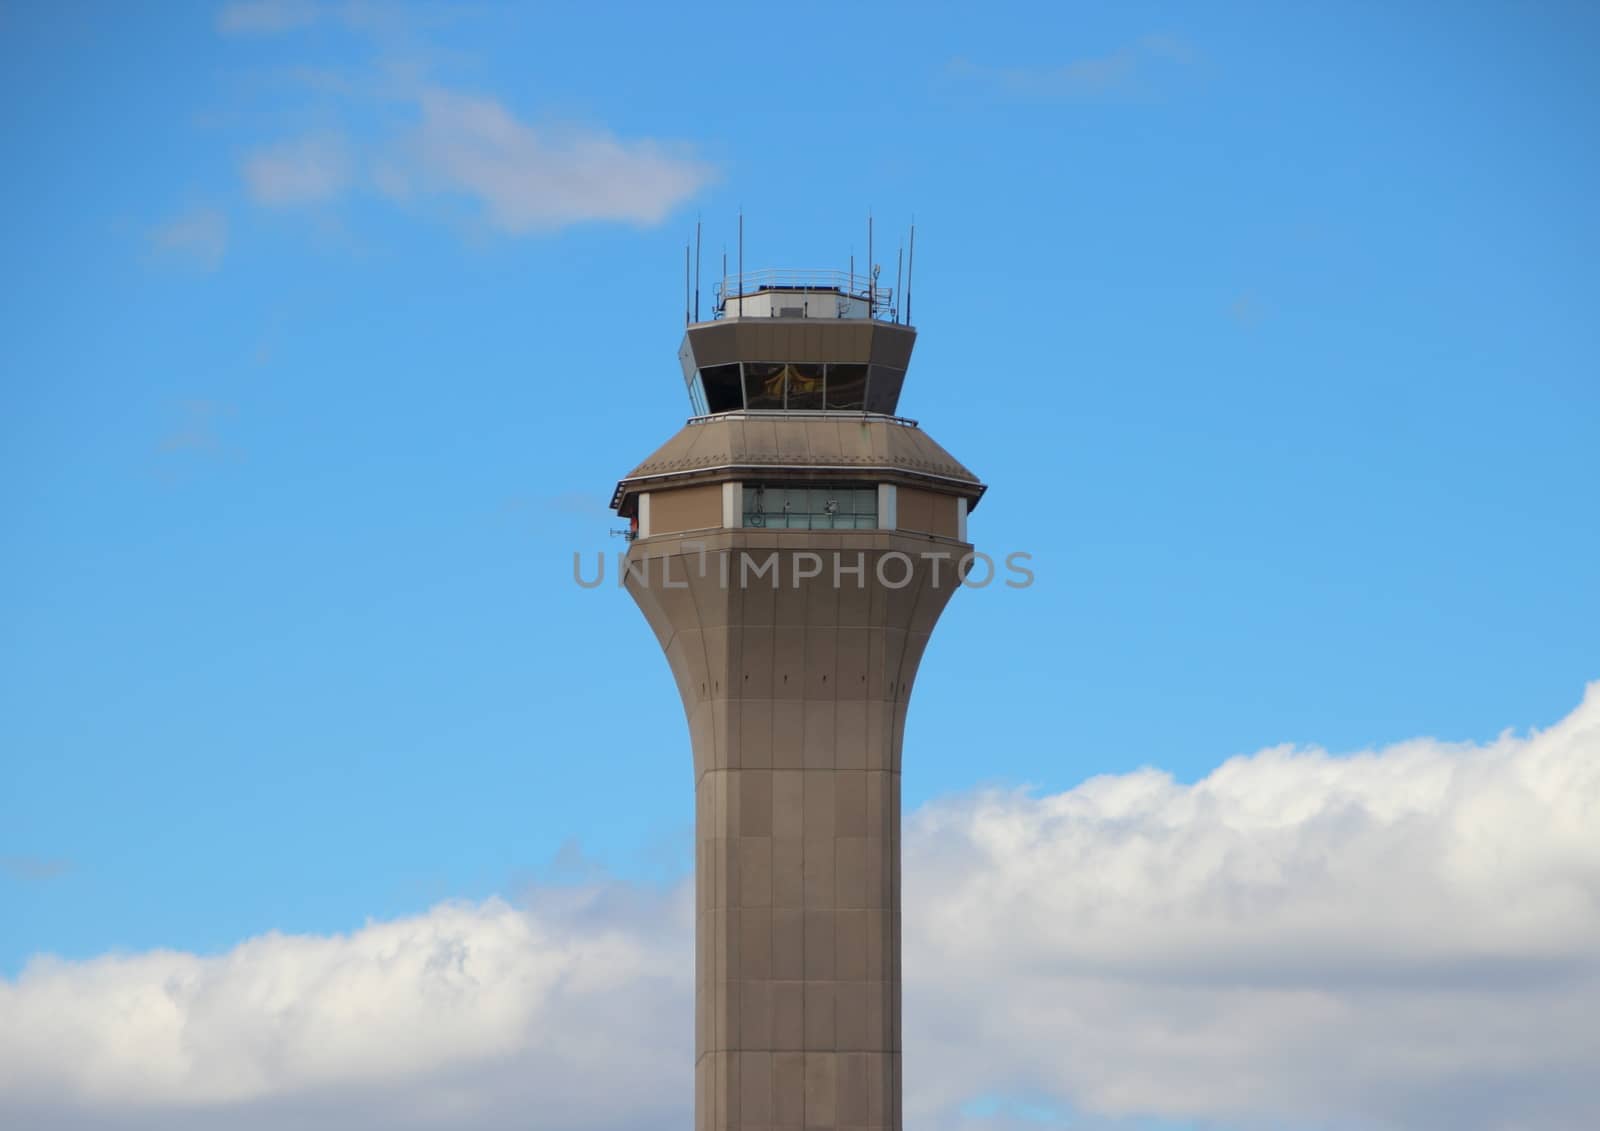 Top of Grey Airport Control Tower with Clouds and Blue Sky